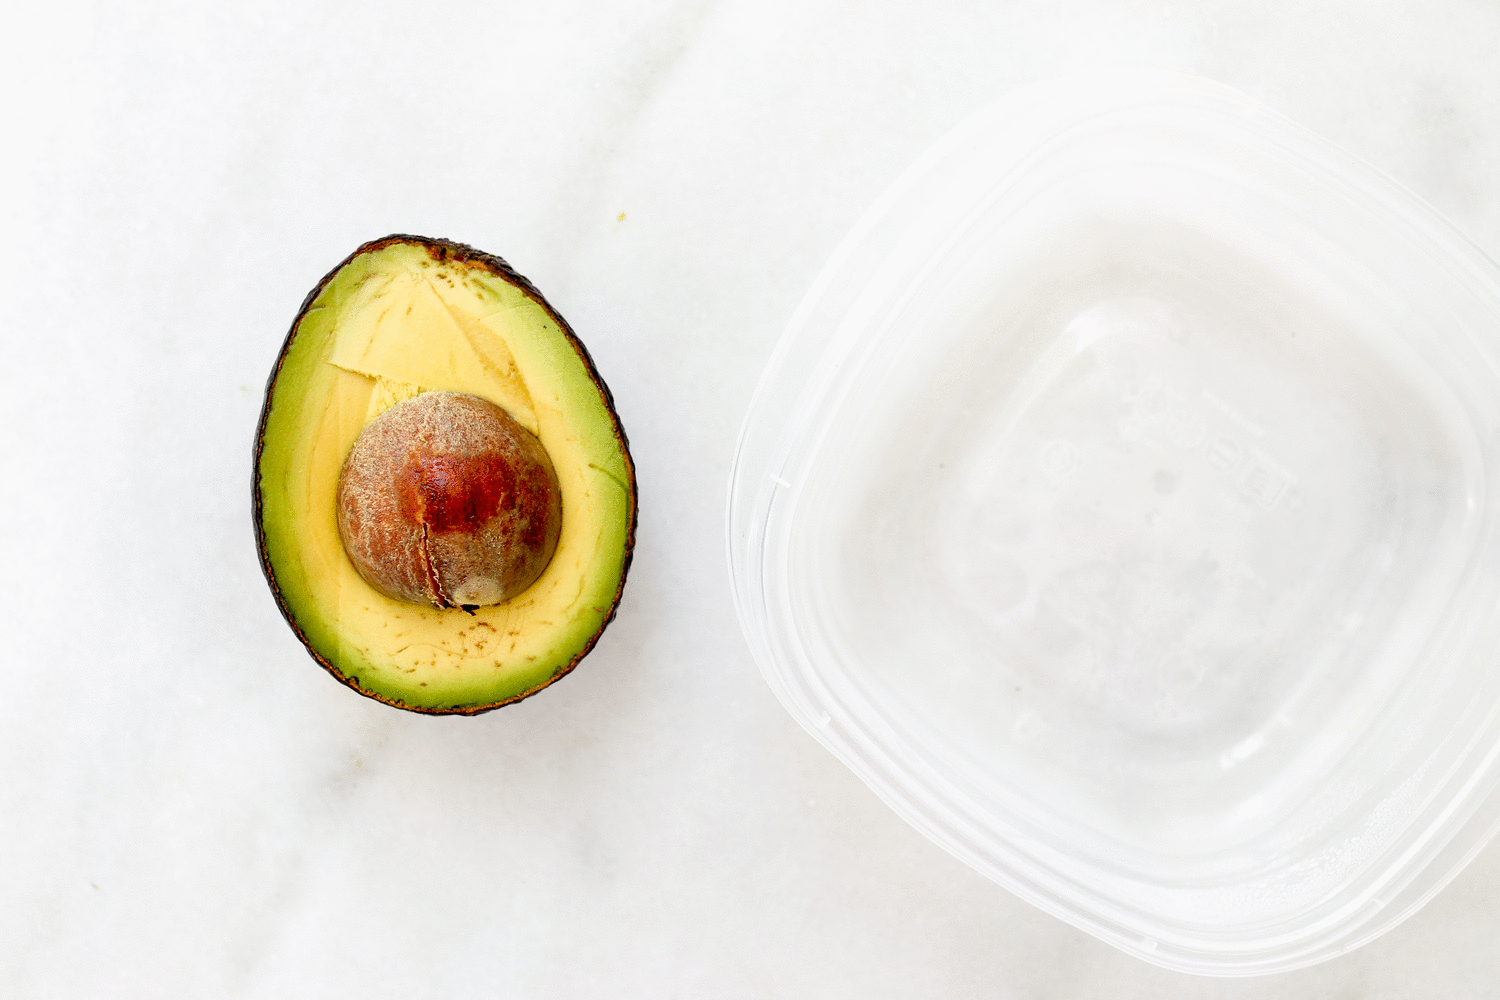 The Best Way to Store a Cut Avocado